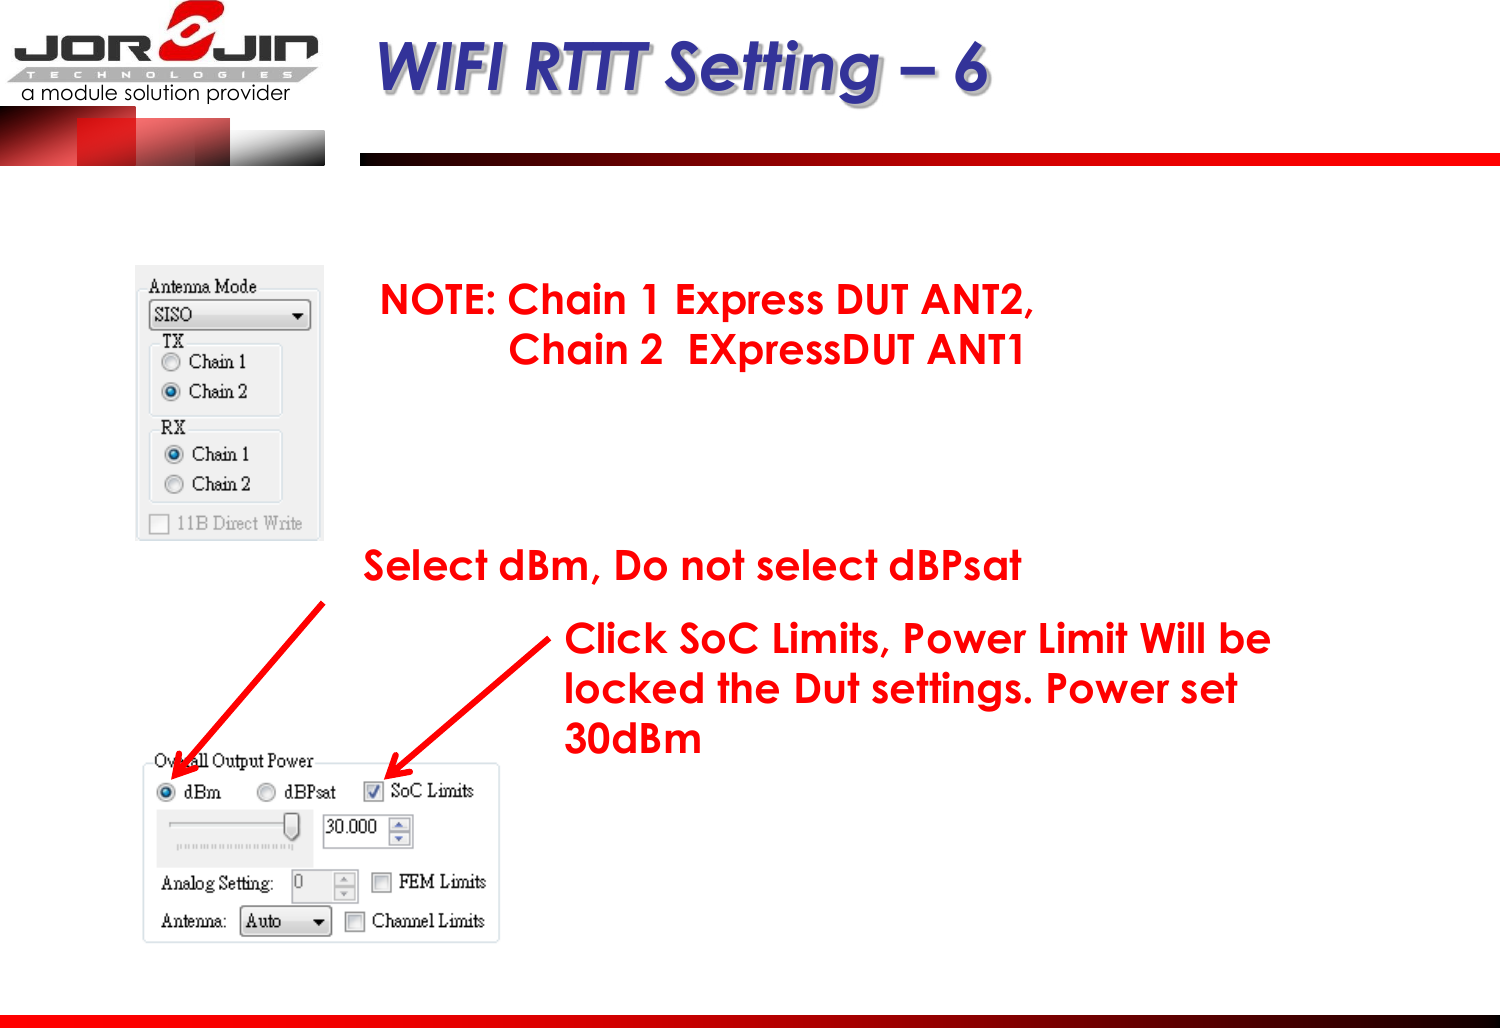 a module solution provider  WIFI RTTT Setting – 6 NOTE: Chain 1 Express DUT ANT2,             Chain 2  EXpressDUT ANT1  Select dBm, Do not select dBPsat  Click SoC Limits, Power Limit Will be locked the Dut settings. Power set 30dBm  